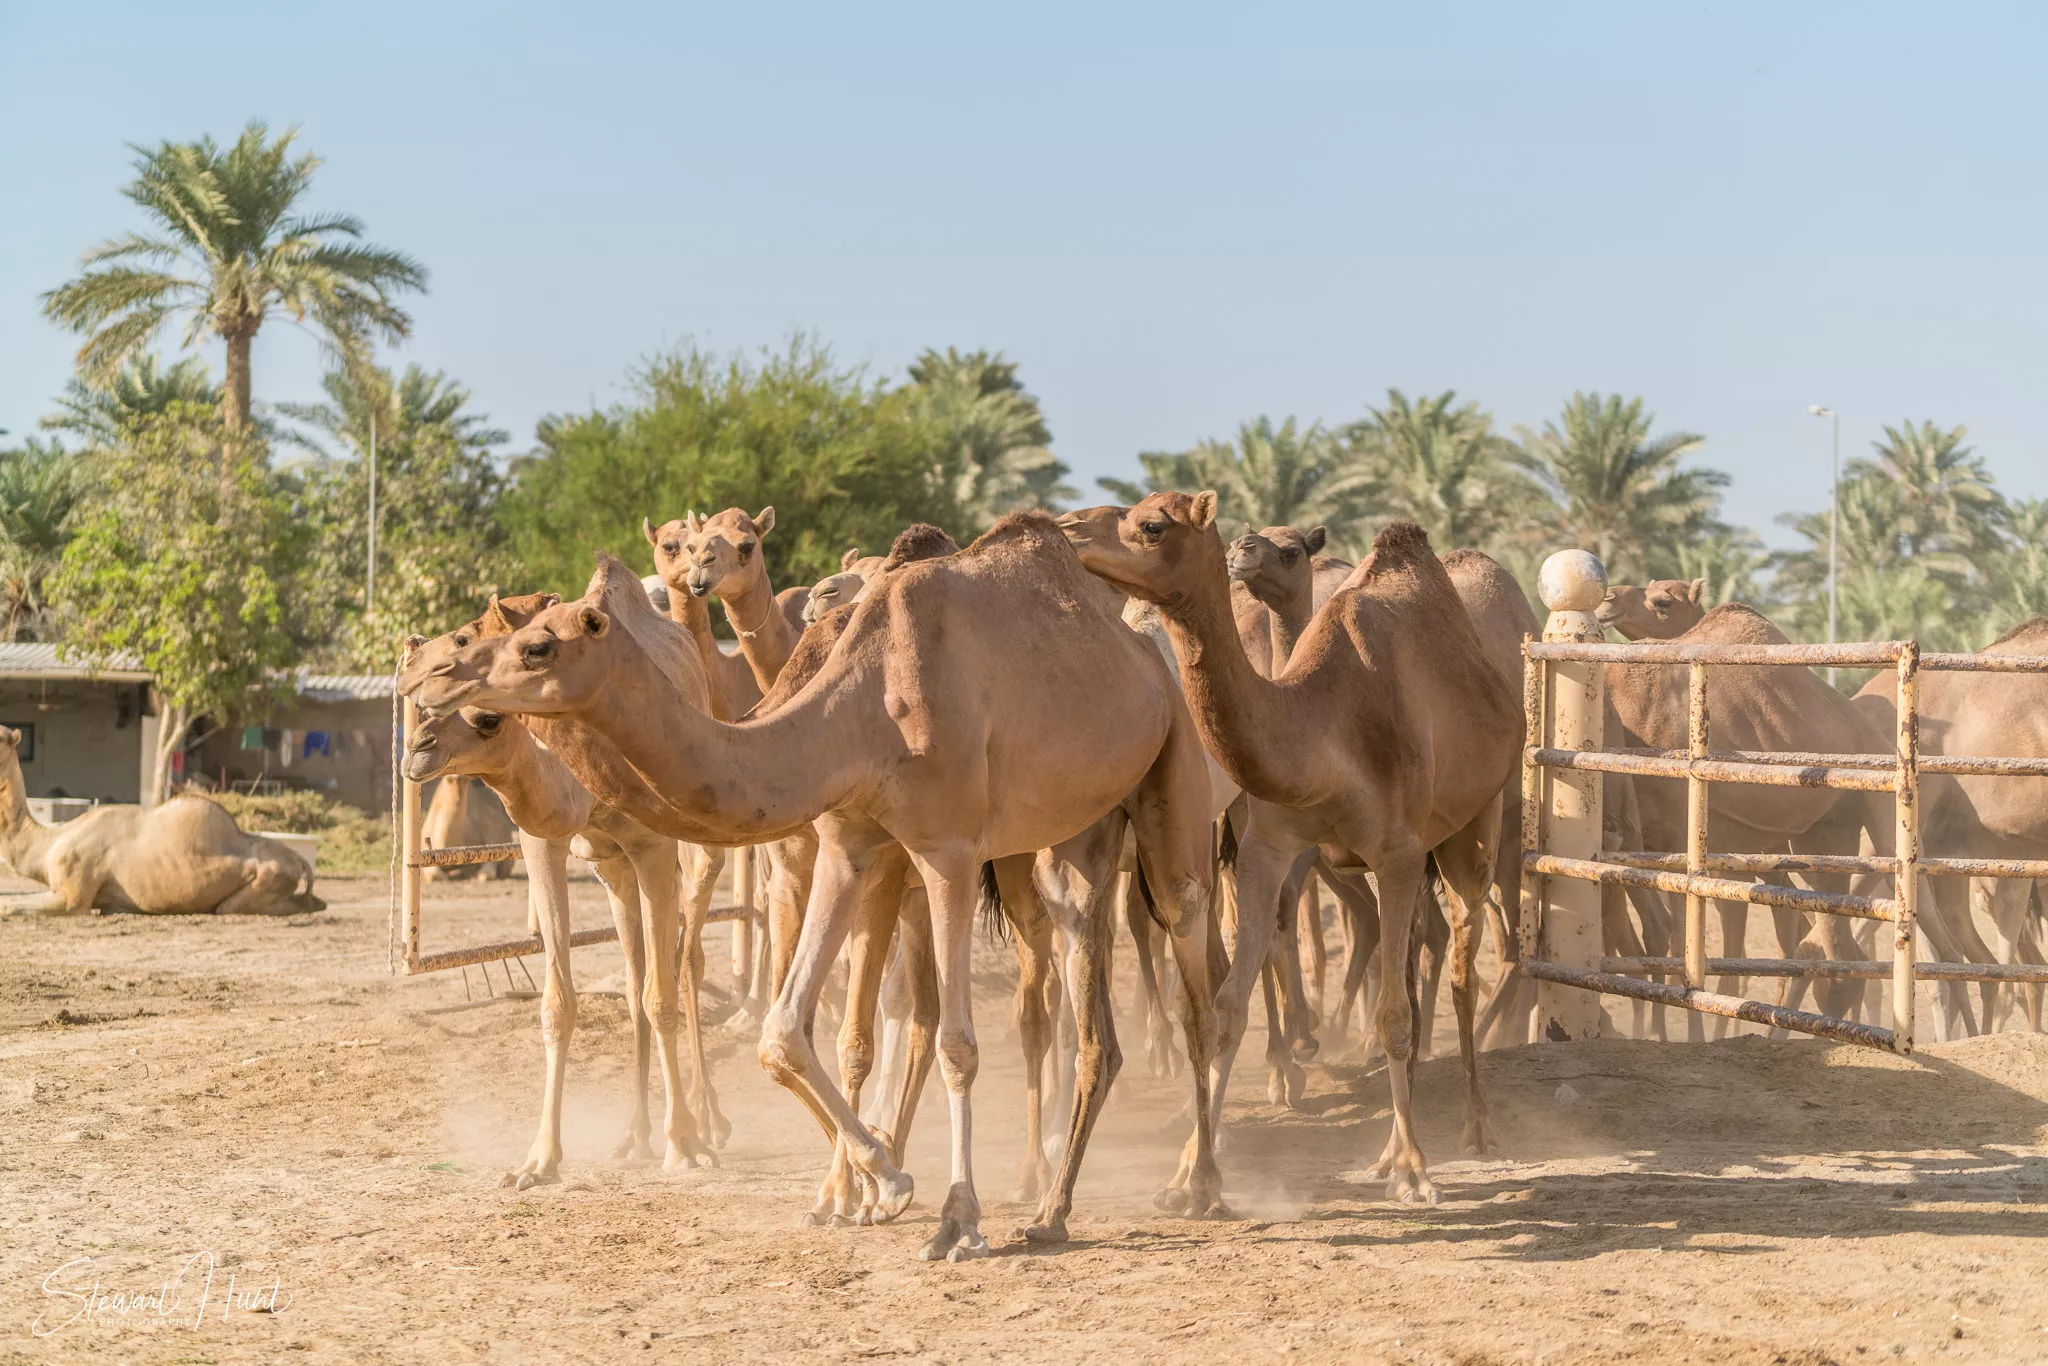 Royal Camel Farm in Bahrain, Middle East | Zoos & Sanctuaries - Rated 3.5